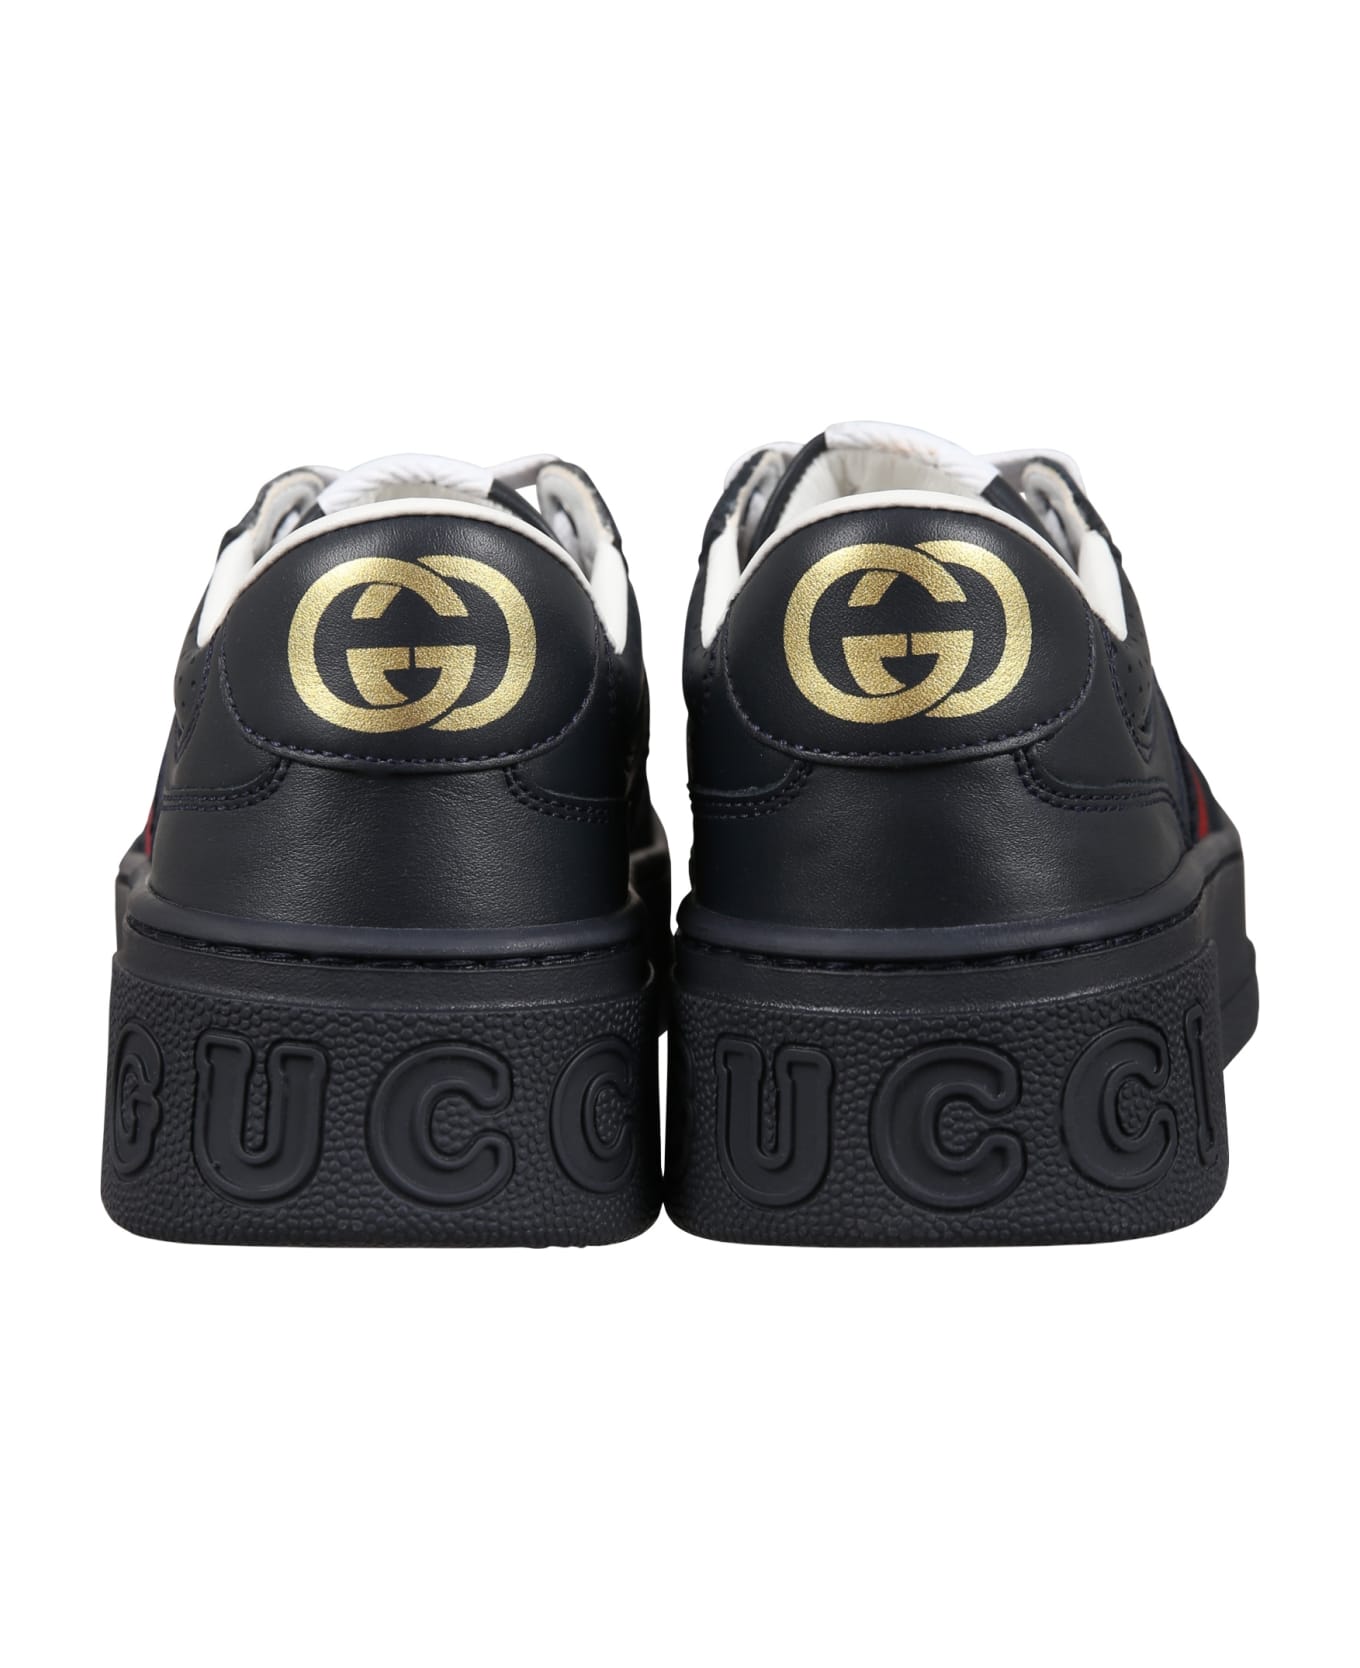 Gucci Blue Sneakers For Boy With Web Tape And Iconic Logo - Blue